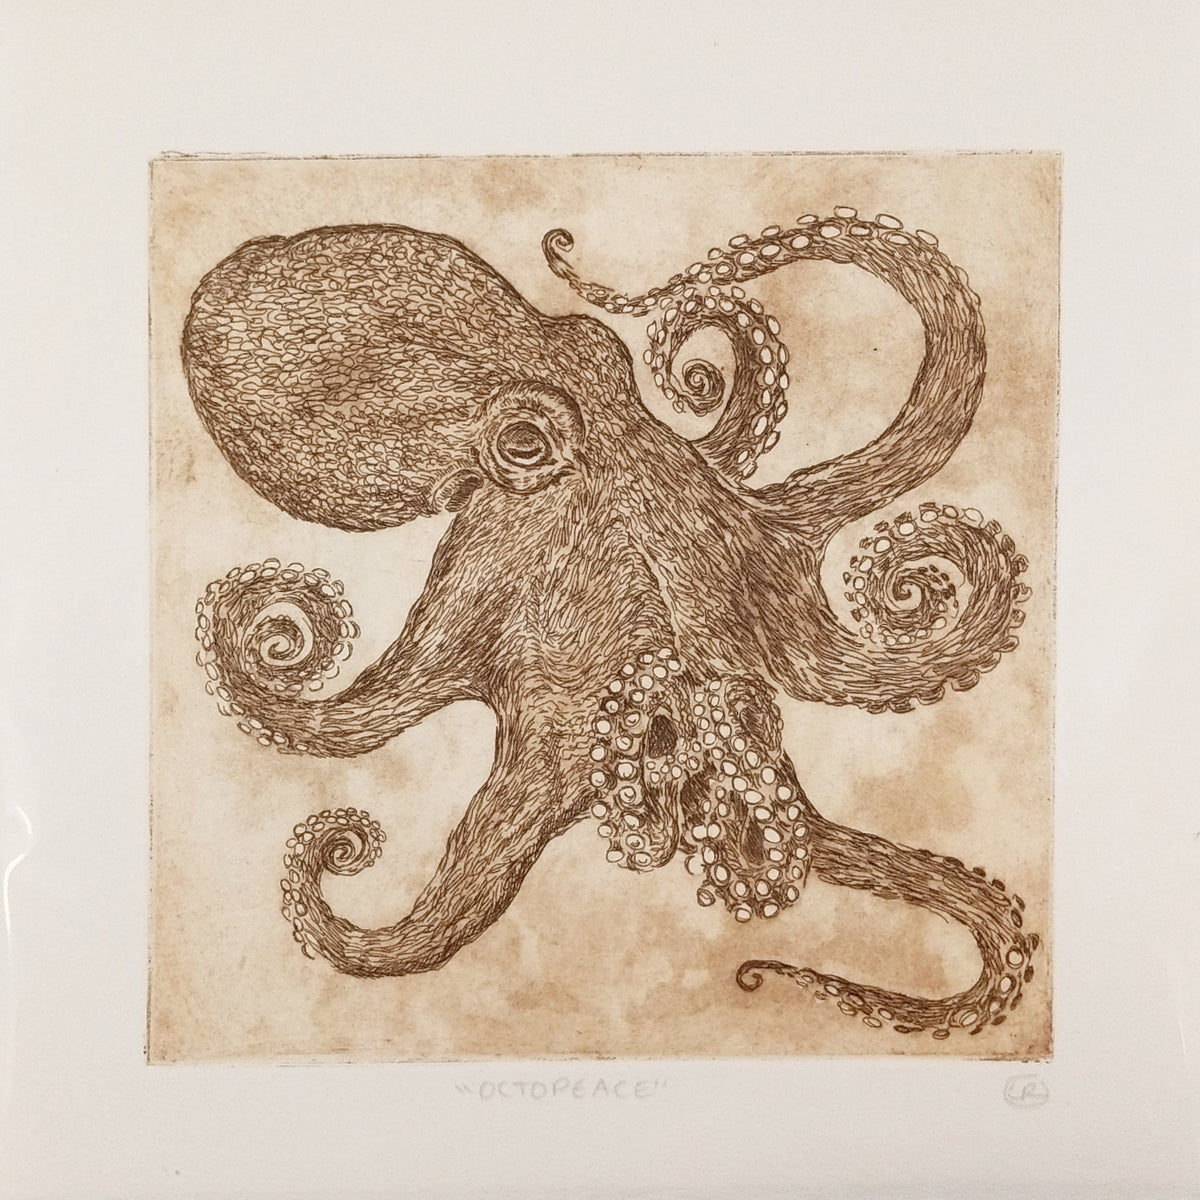 Copy of Octopeace Octopus Etching Sepia